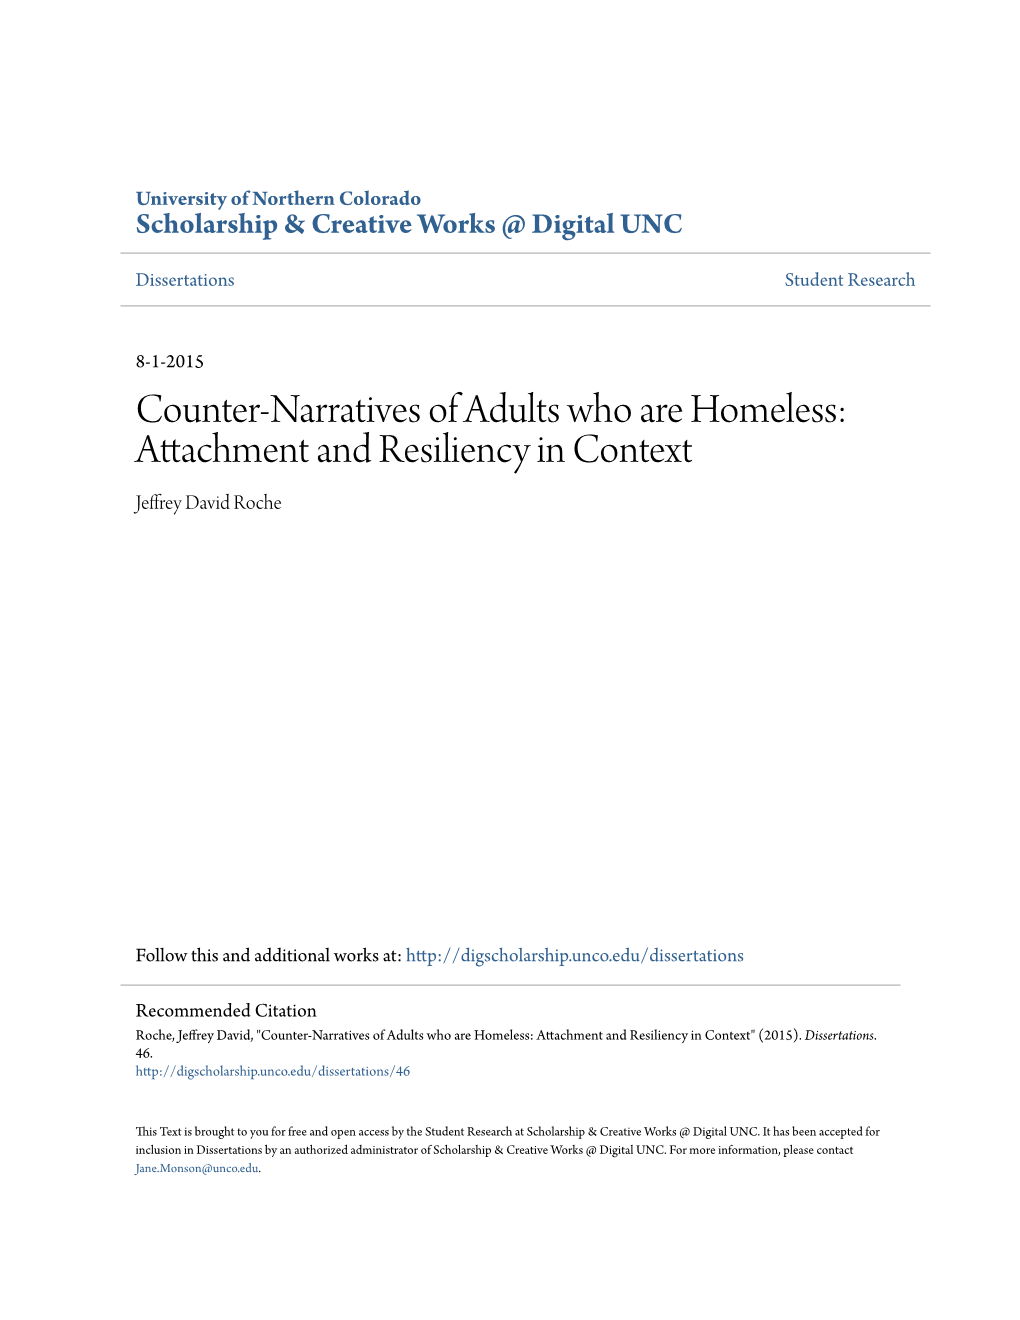 Counter-Narratives of Adults Who Are Homeless: Attachment and Resiliency in Context Jeffrey David Roche